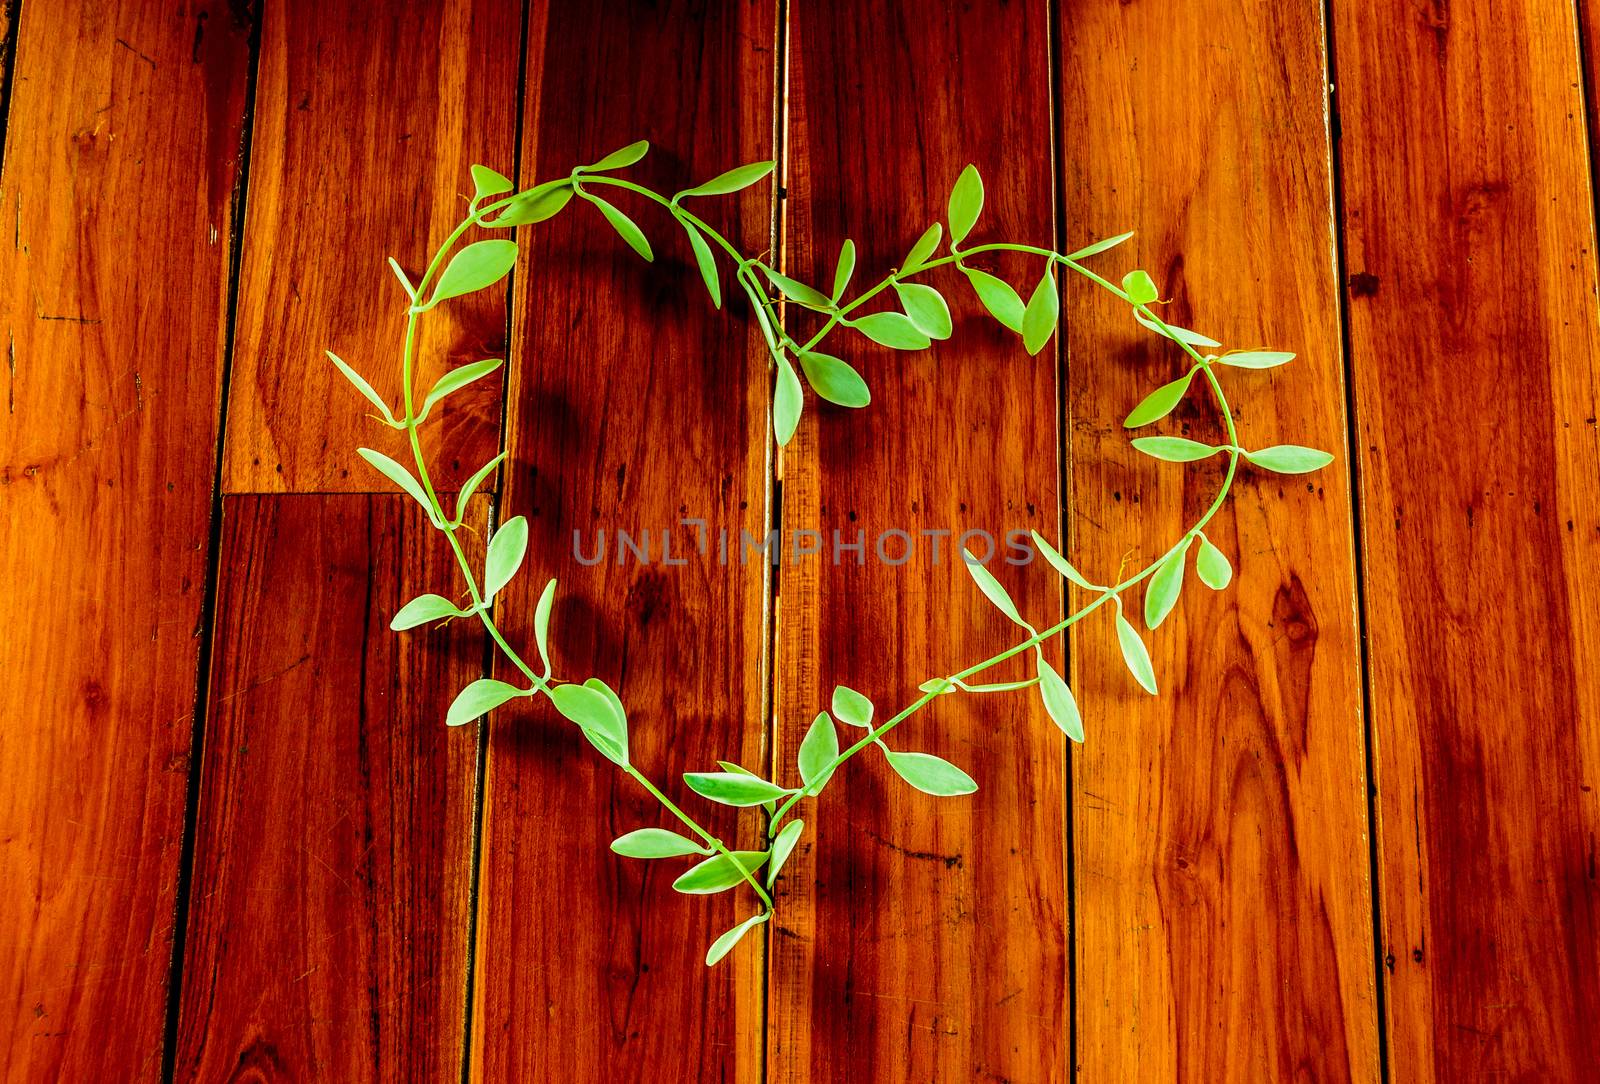 leaves heart are om the wood .Focus on the heart leaves in the image